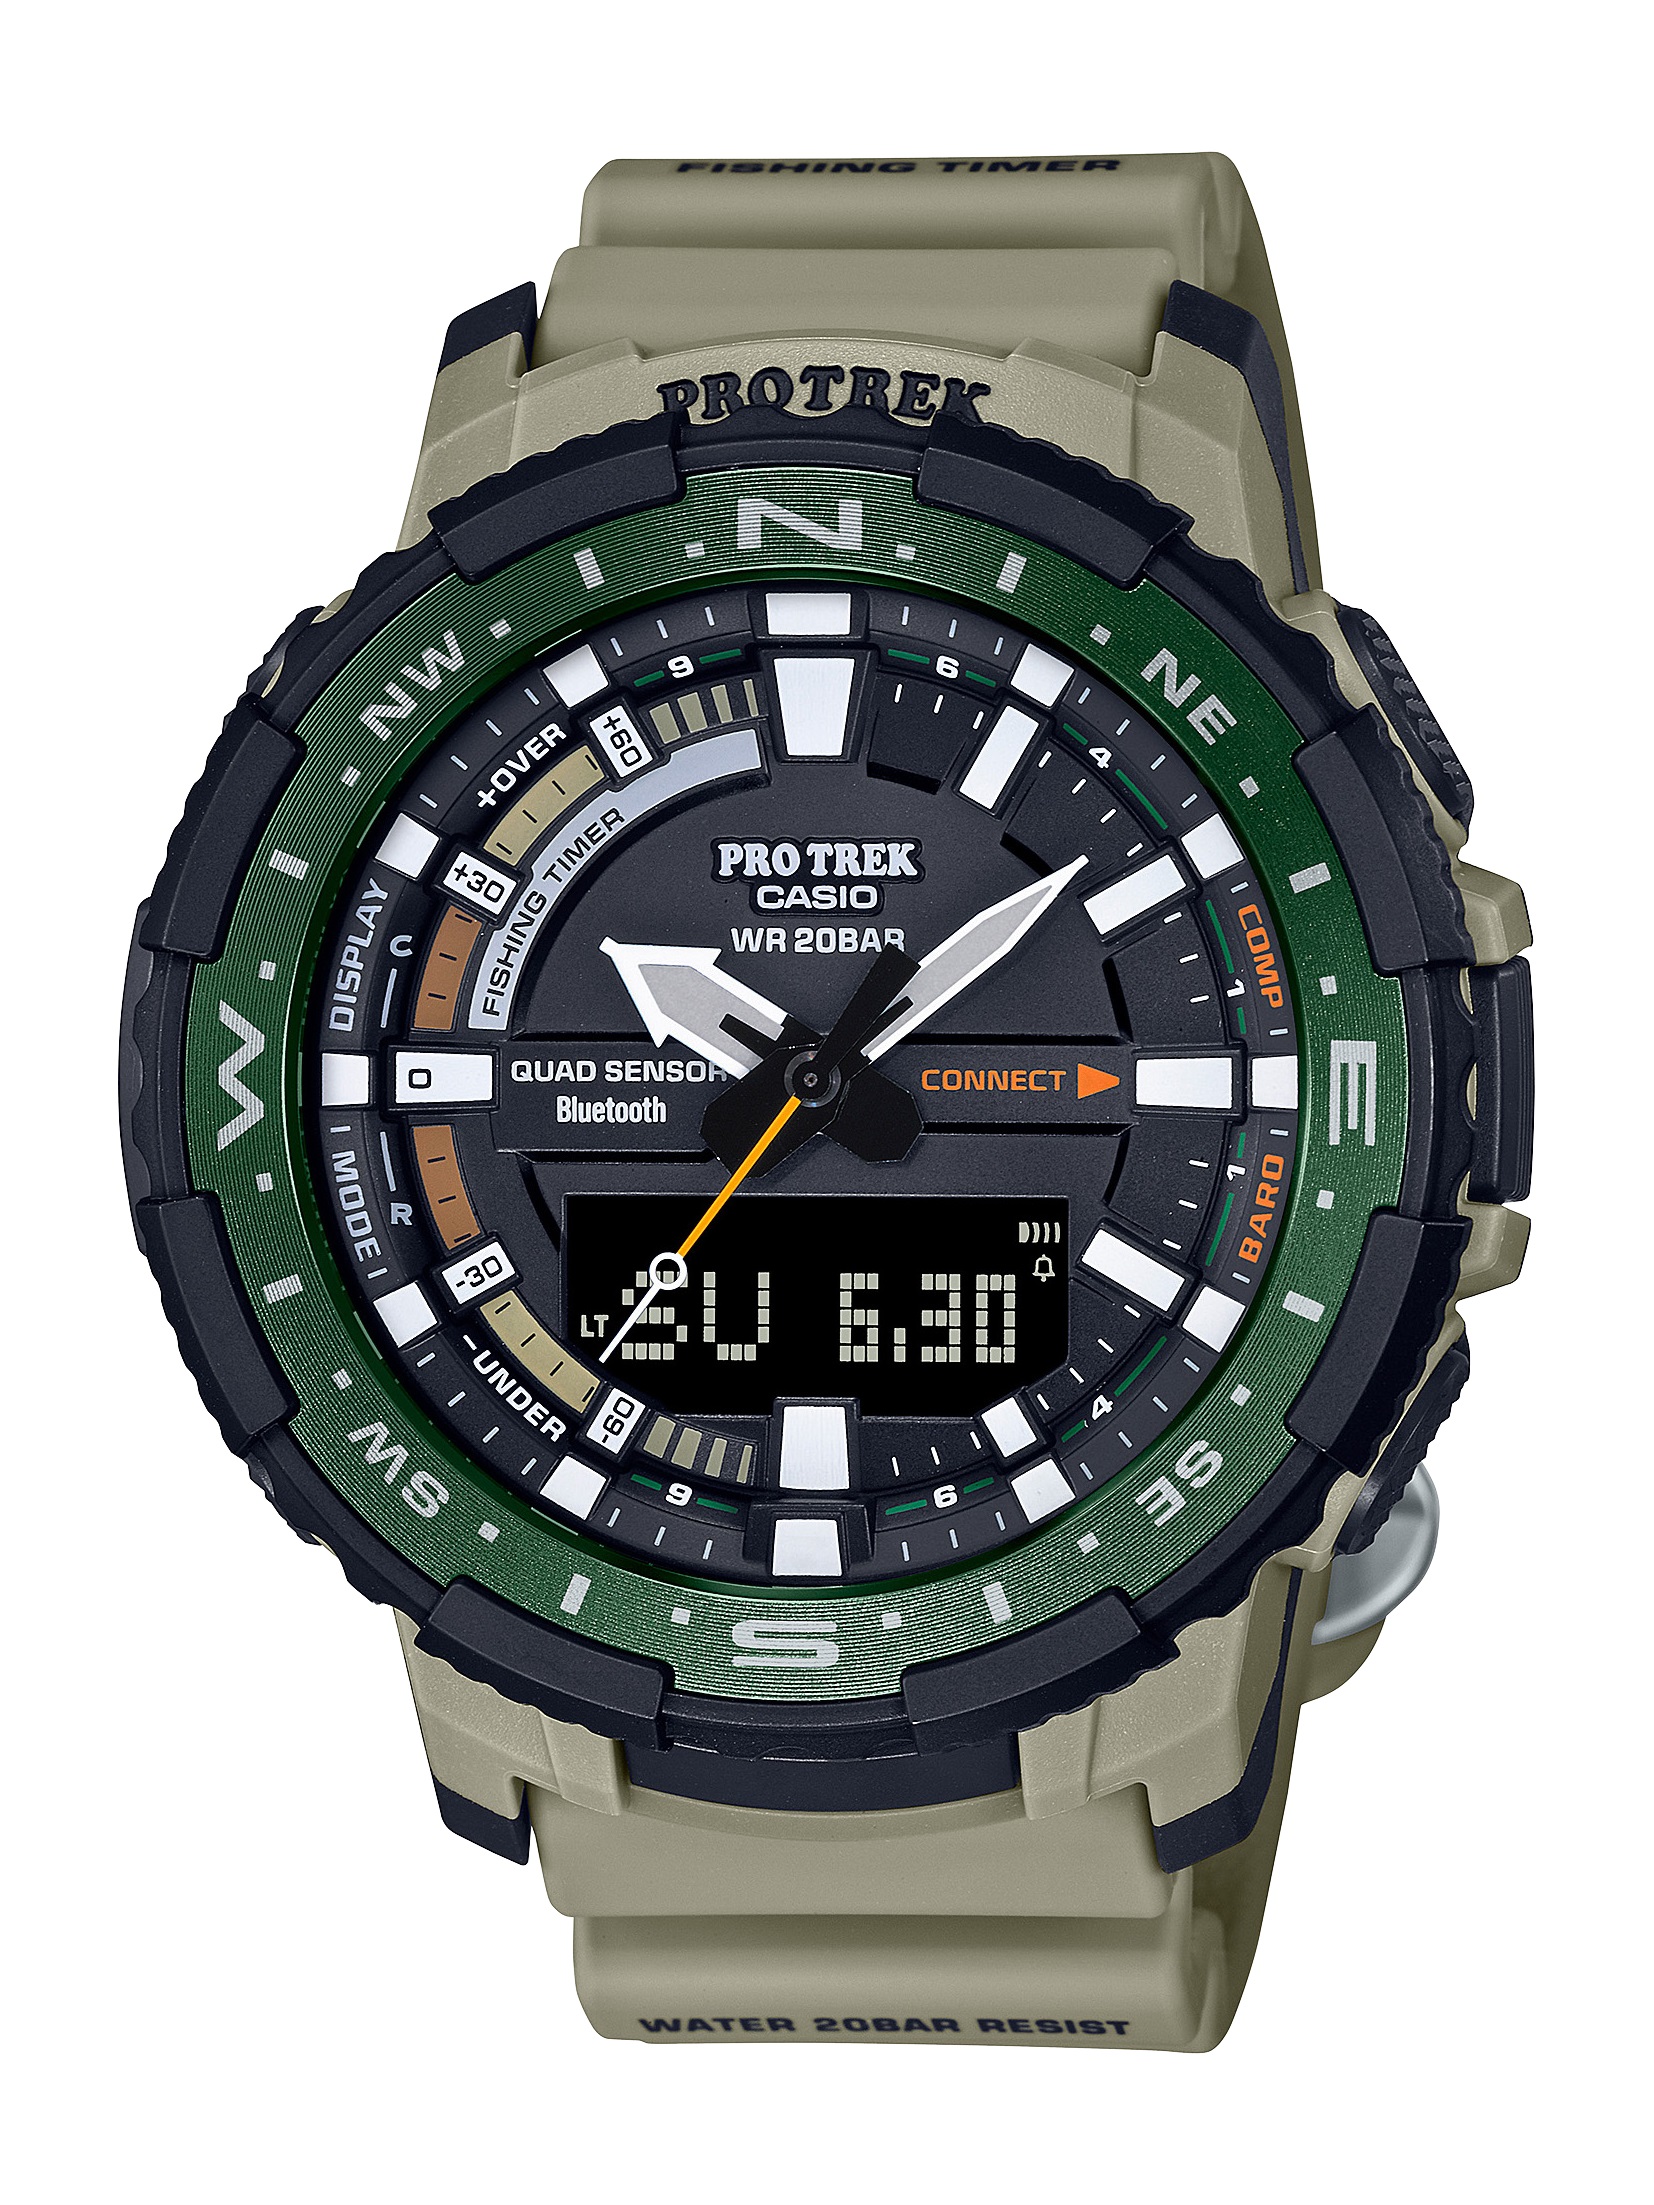 Casio Pro Trek PRTB70 Fishing Timer Watch with Quad Sensor and Smart Phone Link, Brown/Green - image 1 of 3